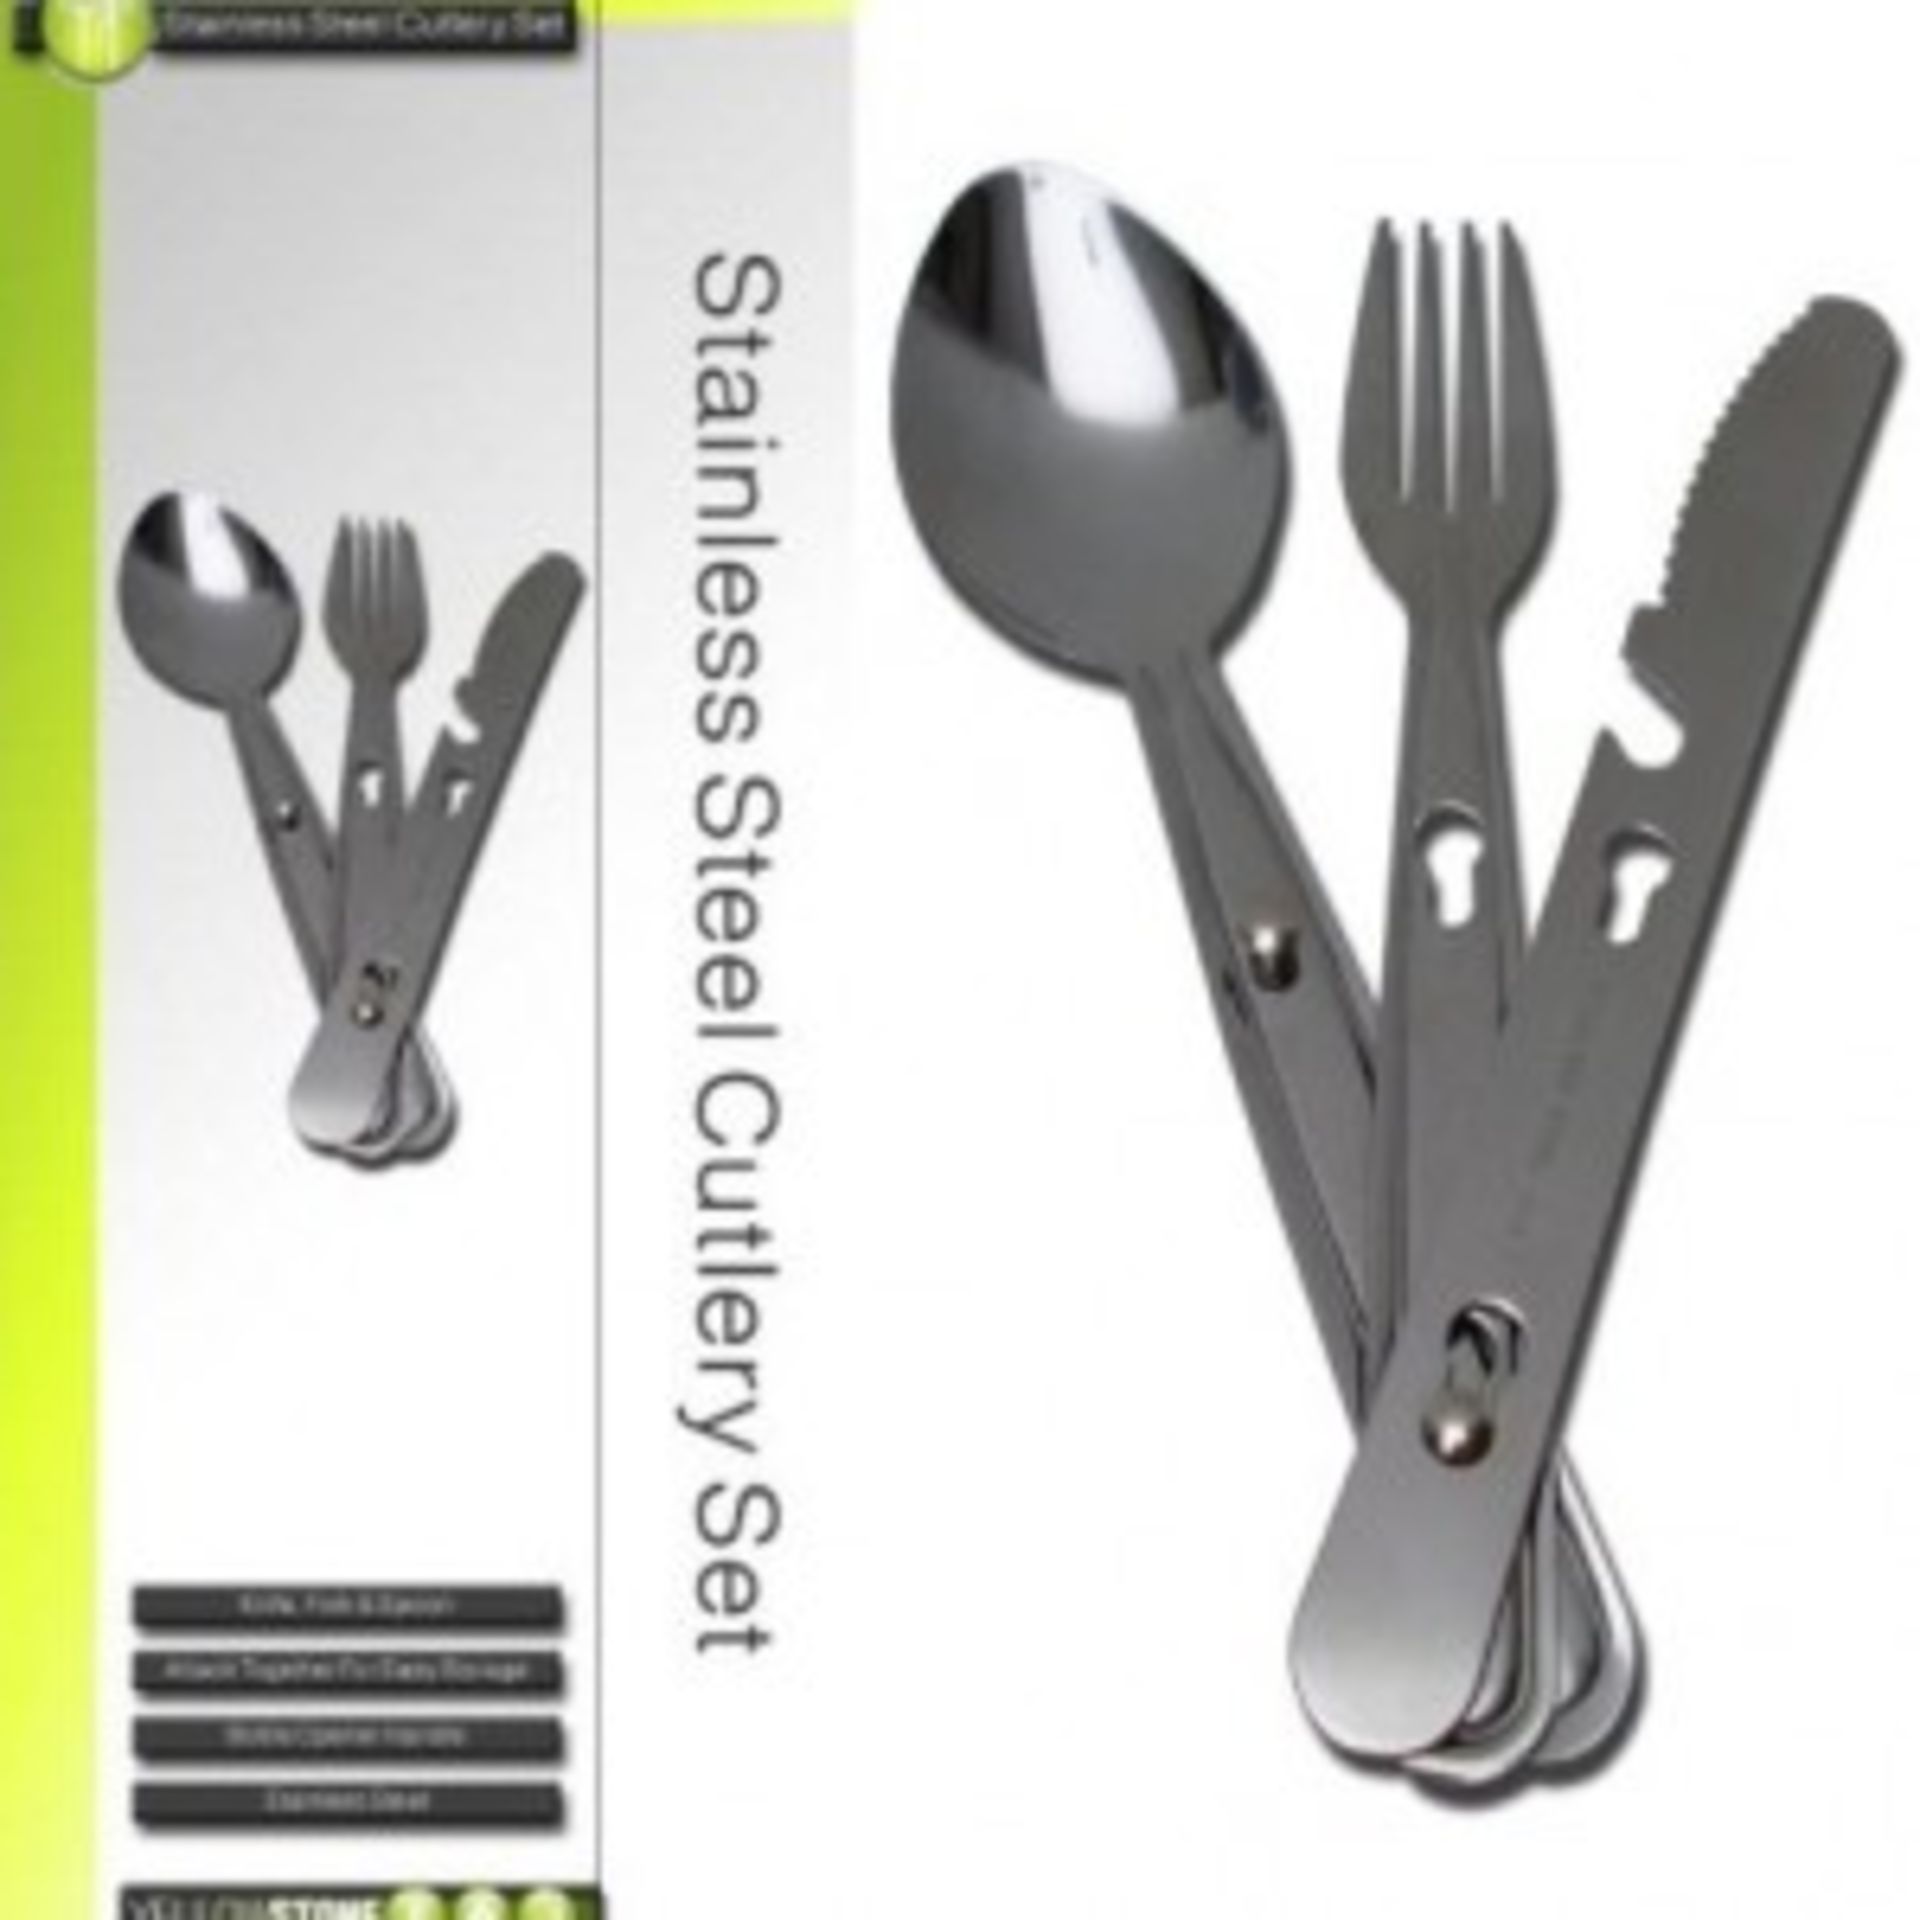 V Brand New Four Stainless Steel Folding Cutlery Sets X 2 YOUR BID PRICE TO BE MULTIPLIED BY TWO